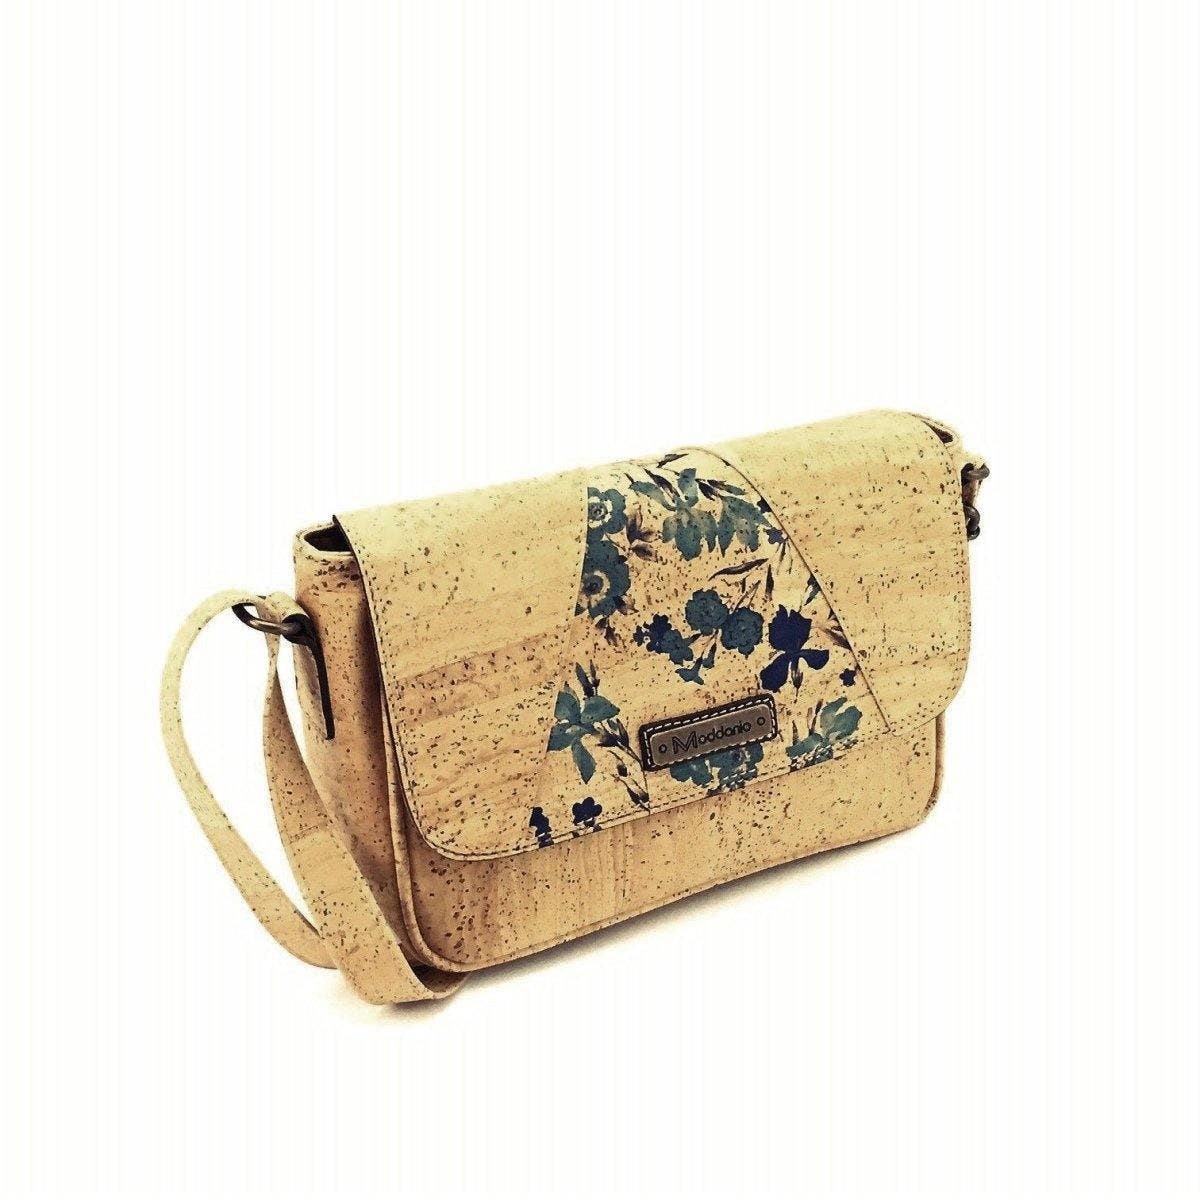 Cork Crossbody Purse for Women and Small Vegan Bag in Blue Floral